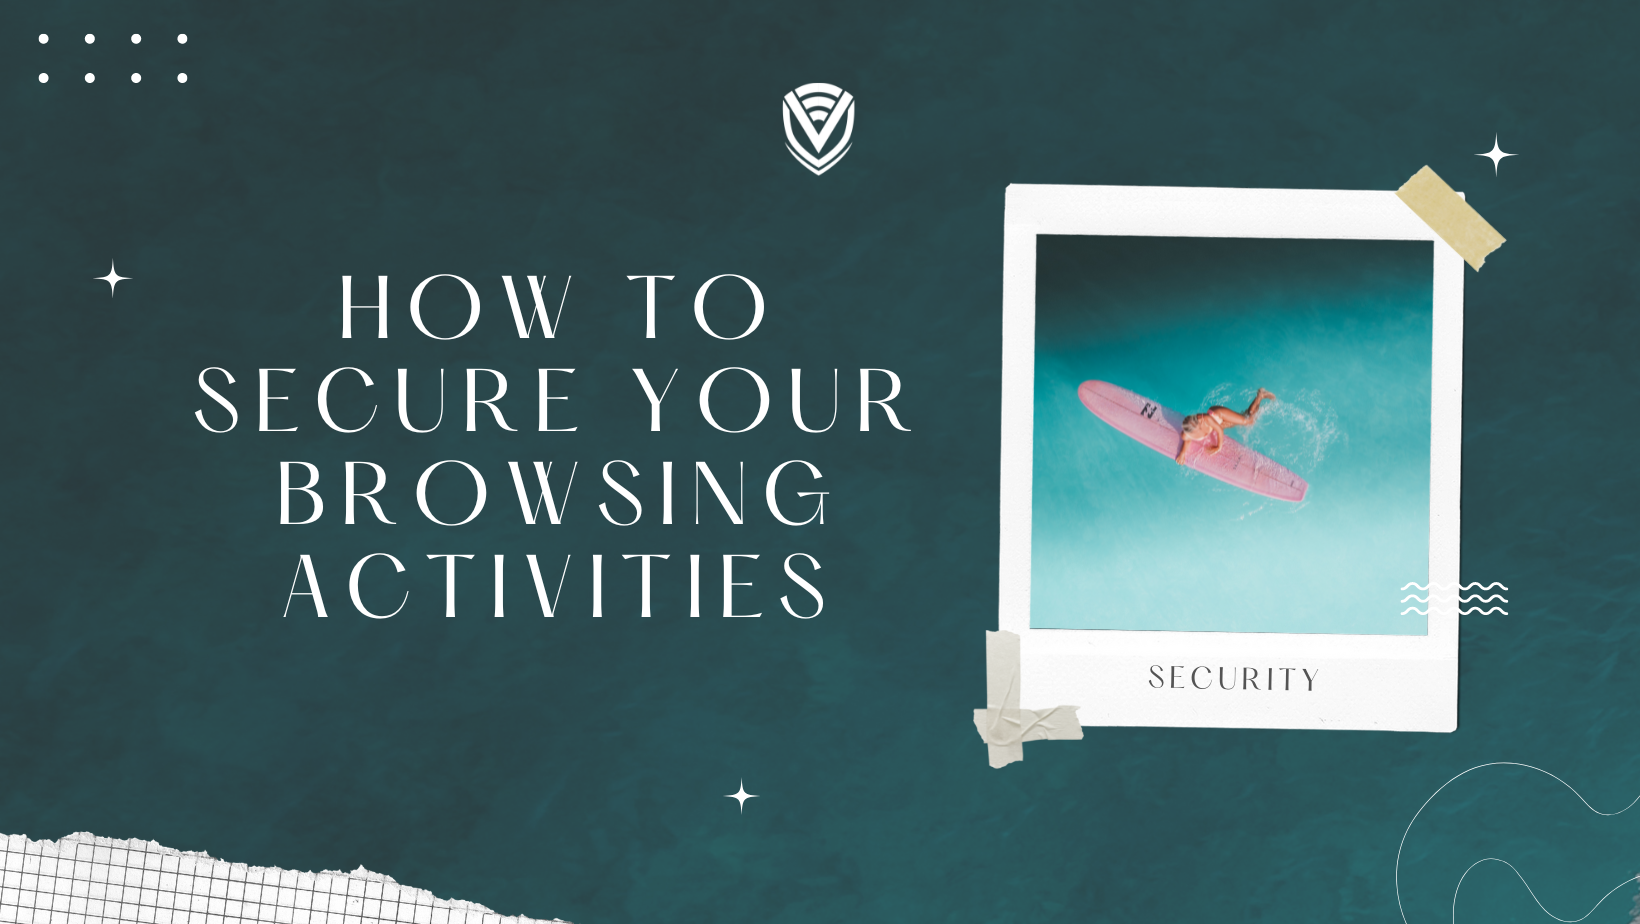 How To Secure Your Browsing Activities